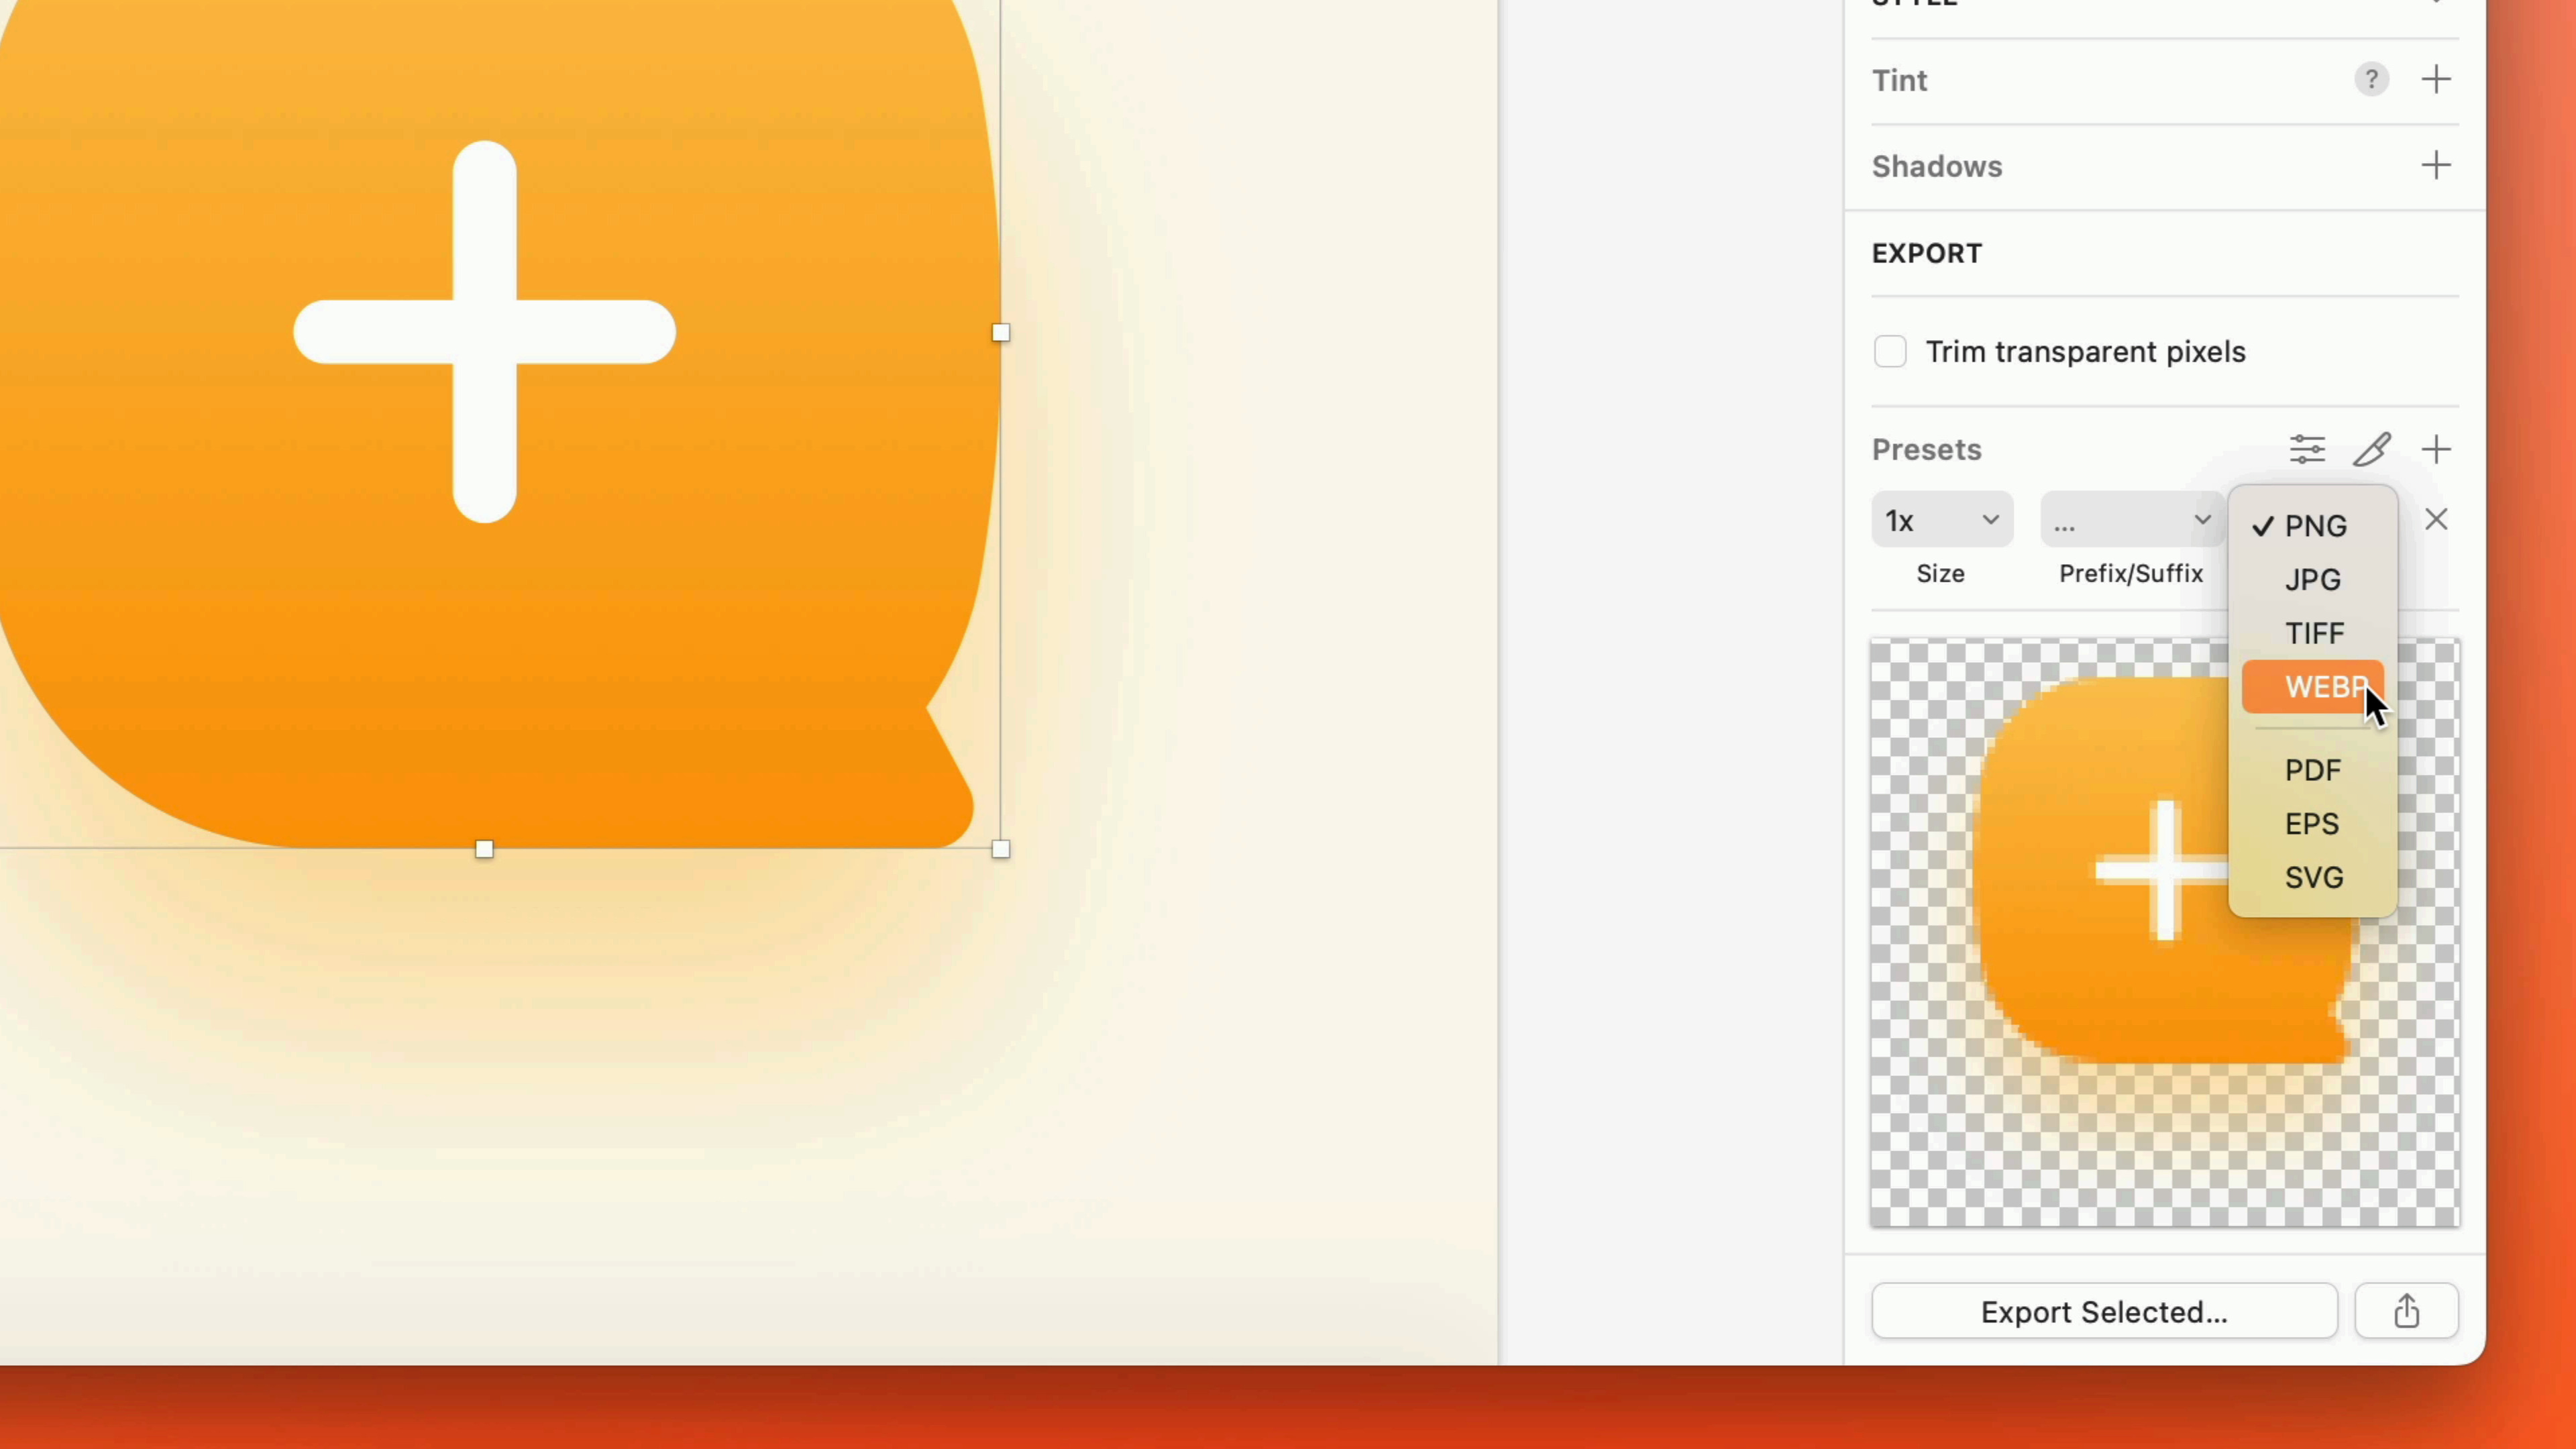 SKETCH File - What is an .sketch file and how do I open it?